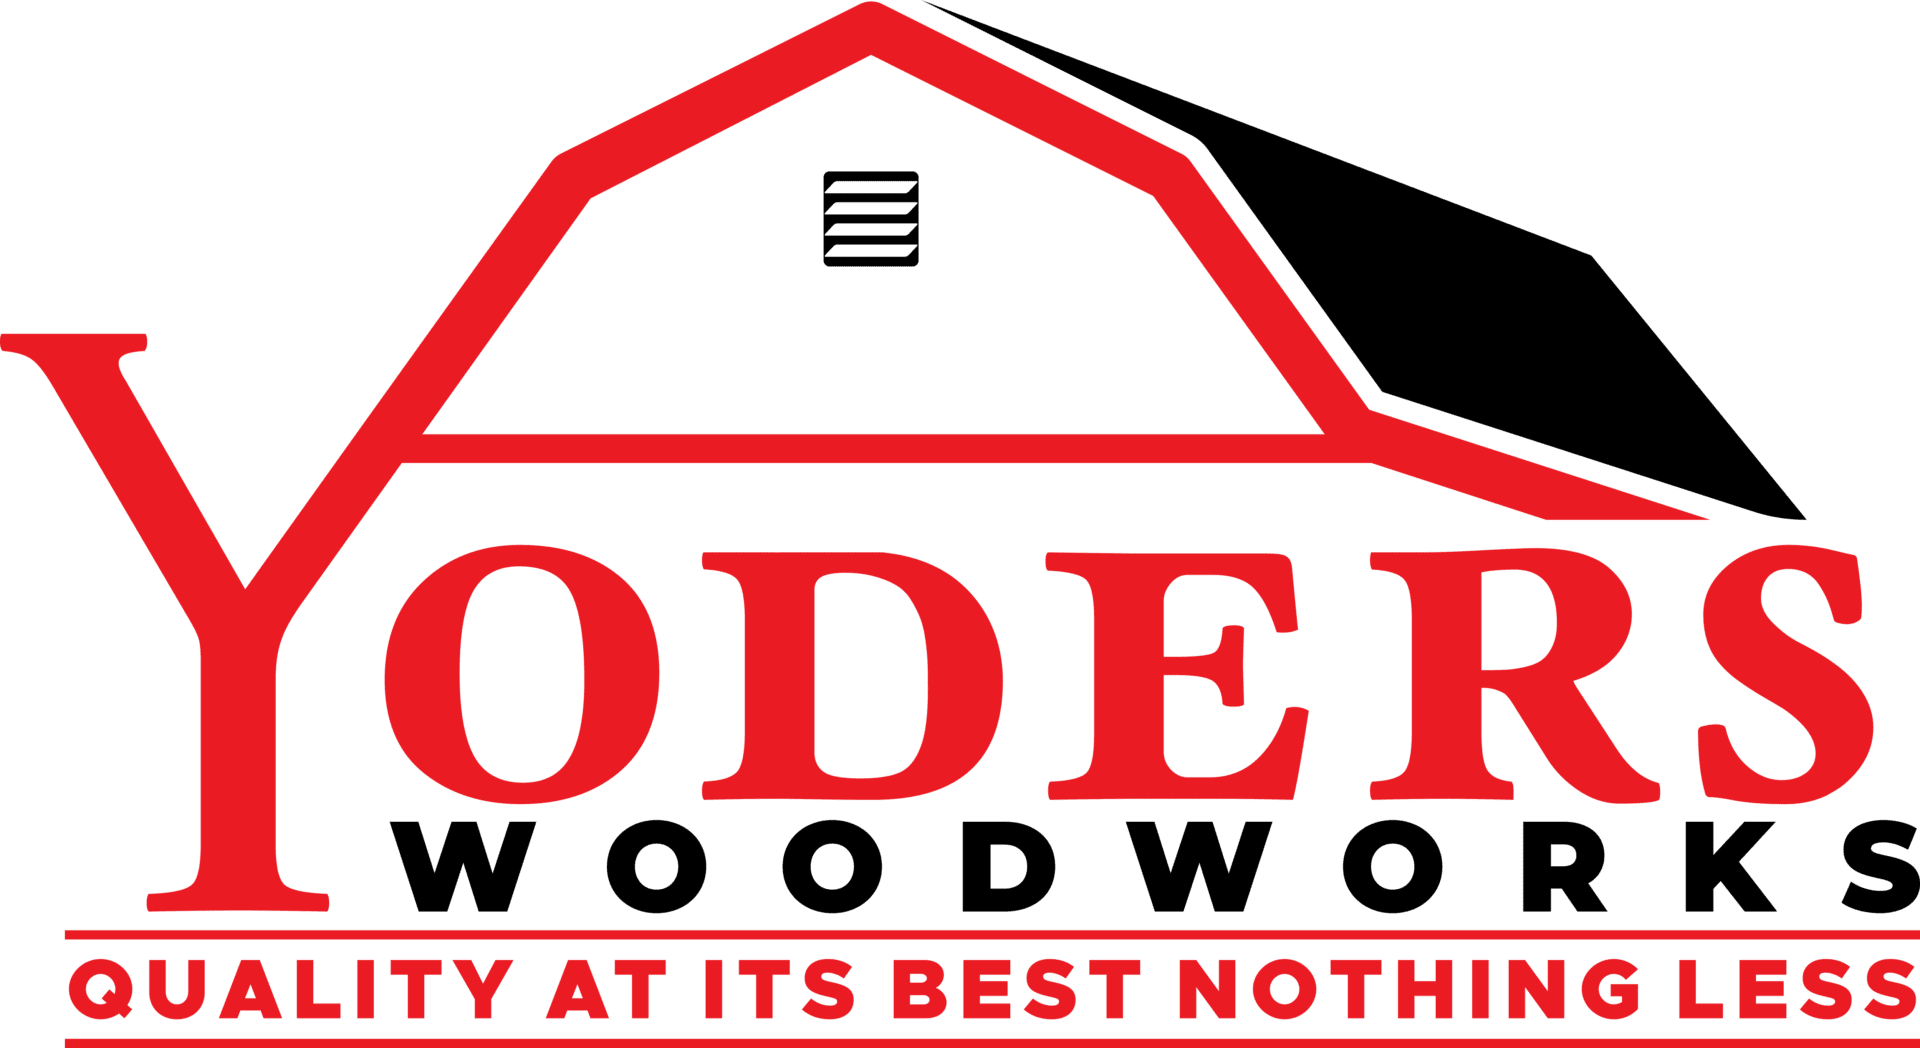 Yoders Woodworks